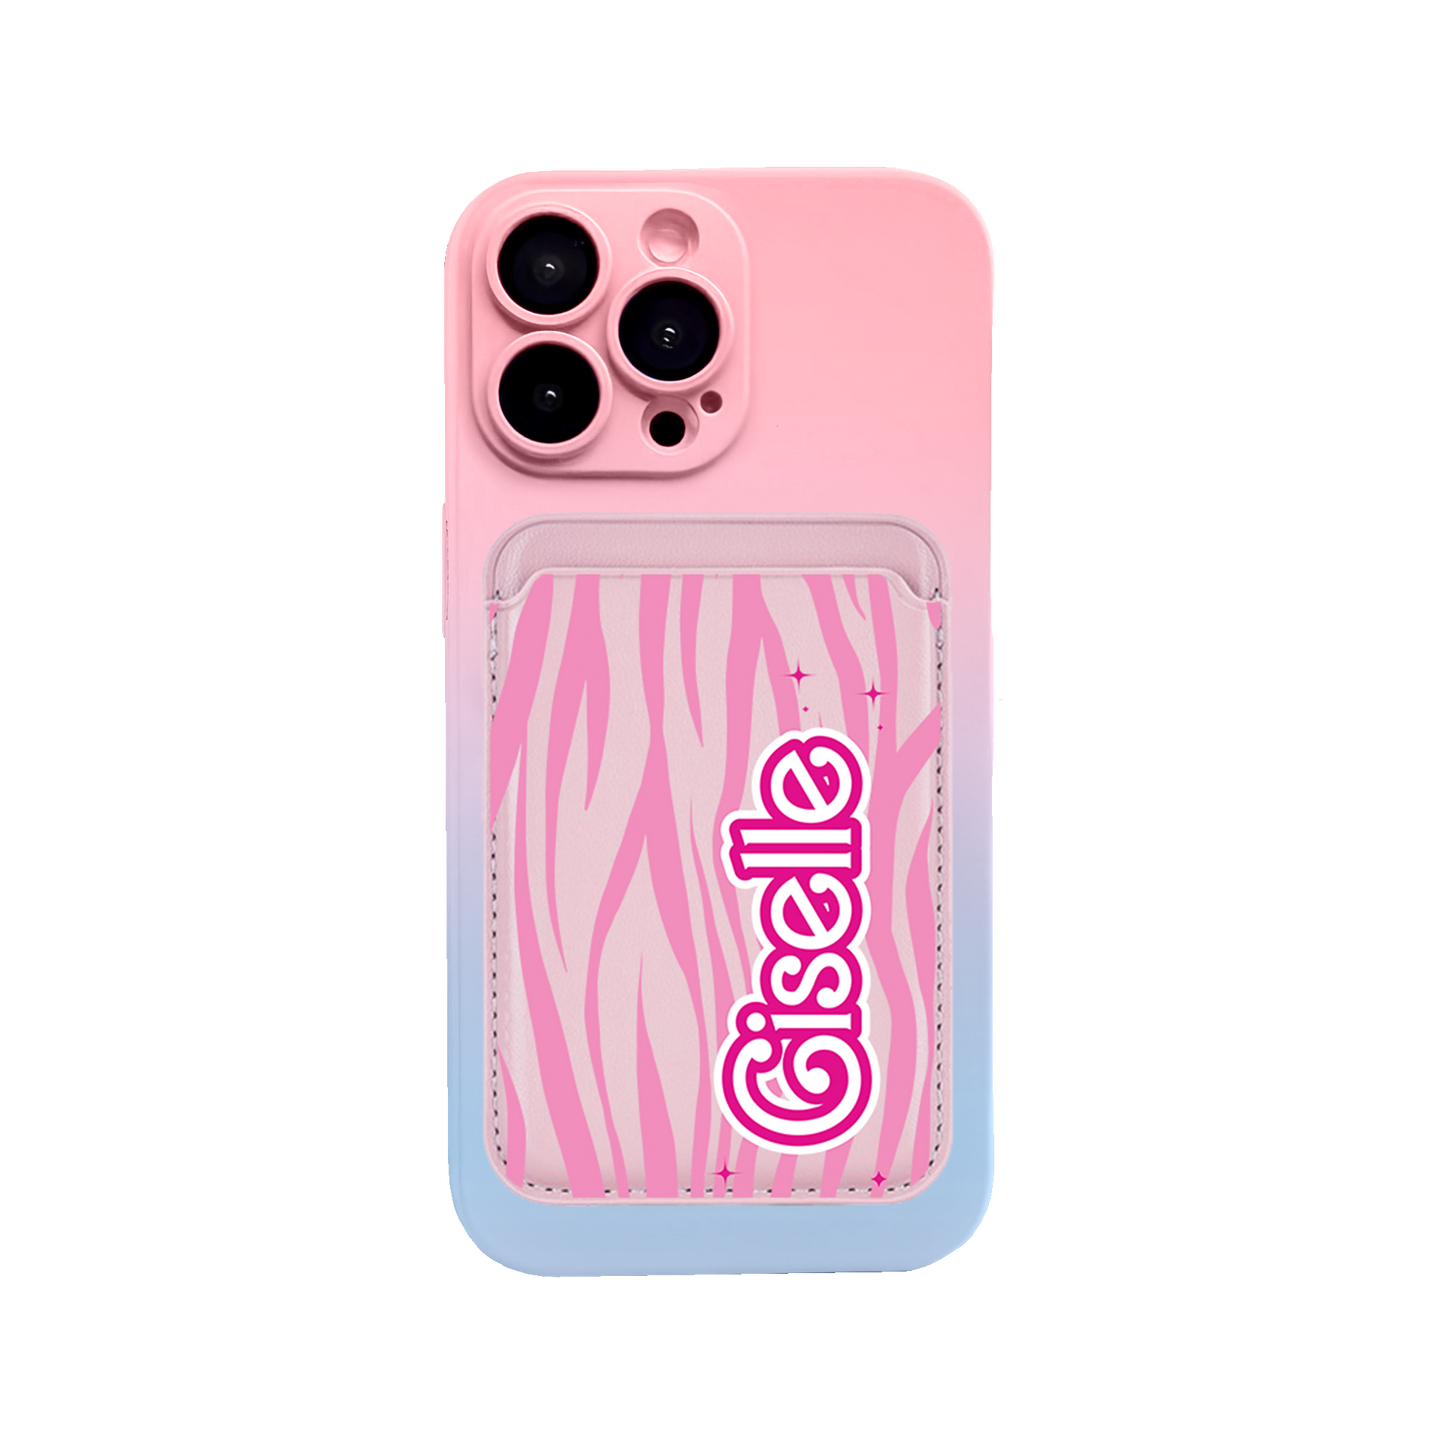 iPhone Magnetic Wallet Silicone Case - Barbie Zebra Pattern